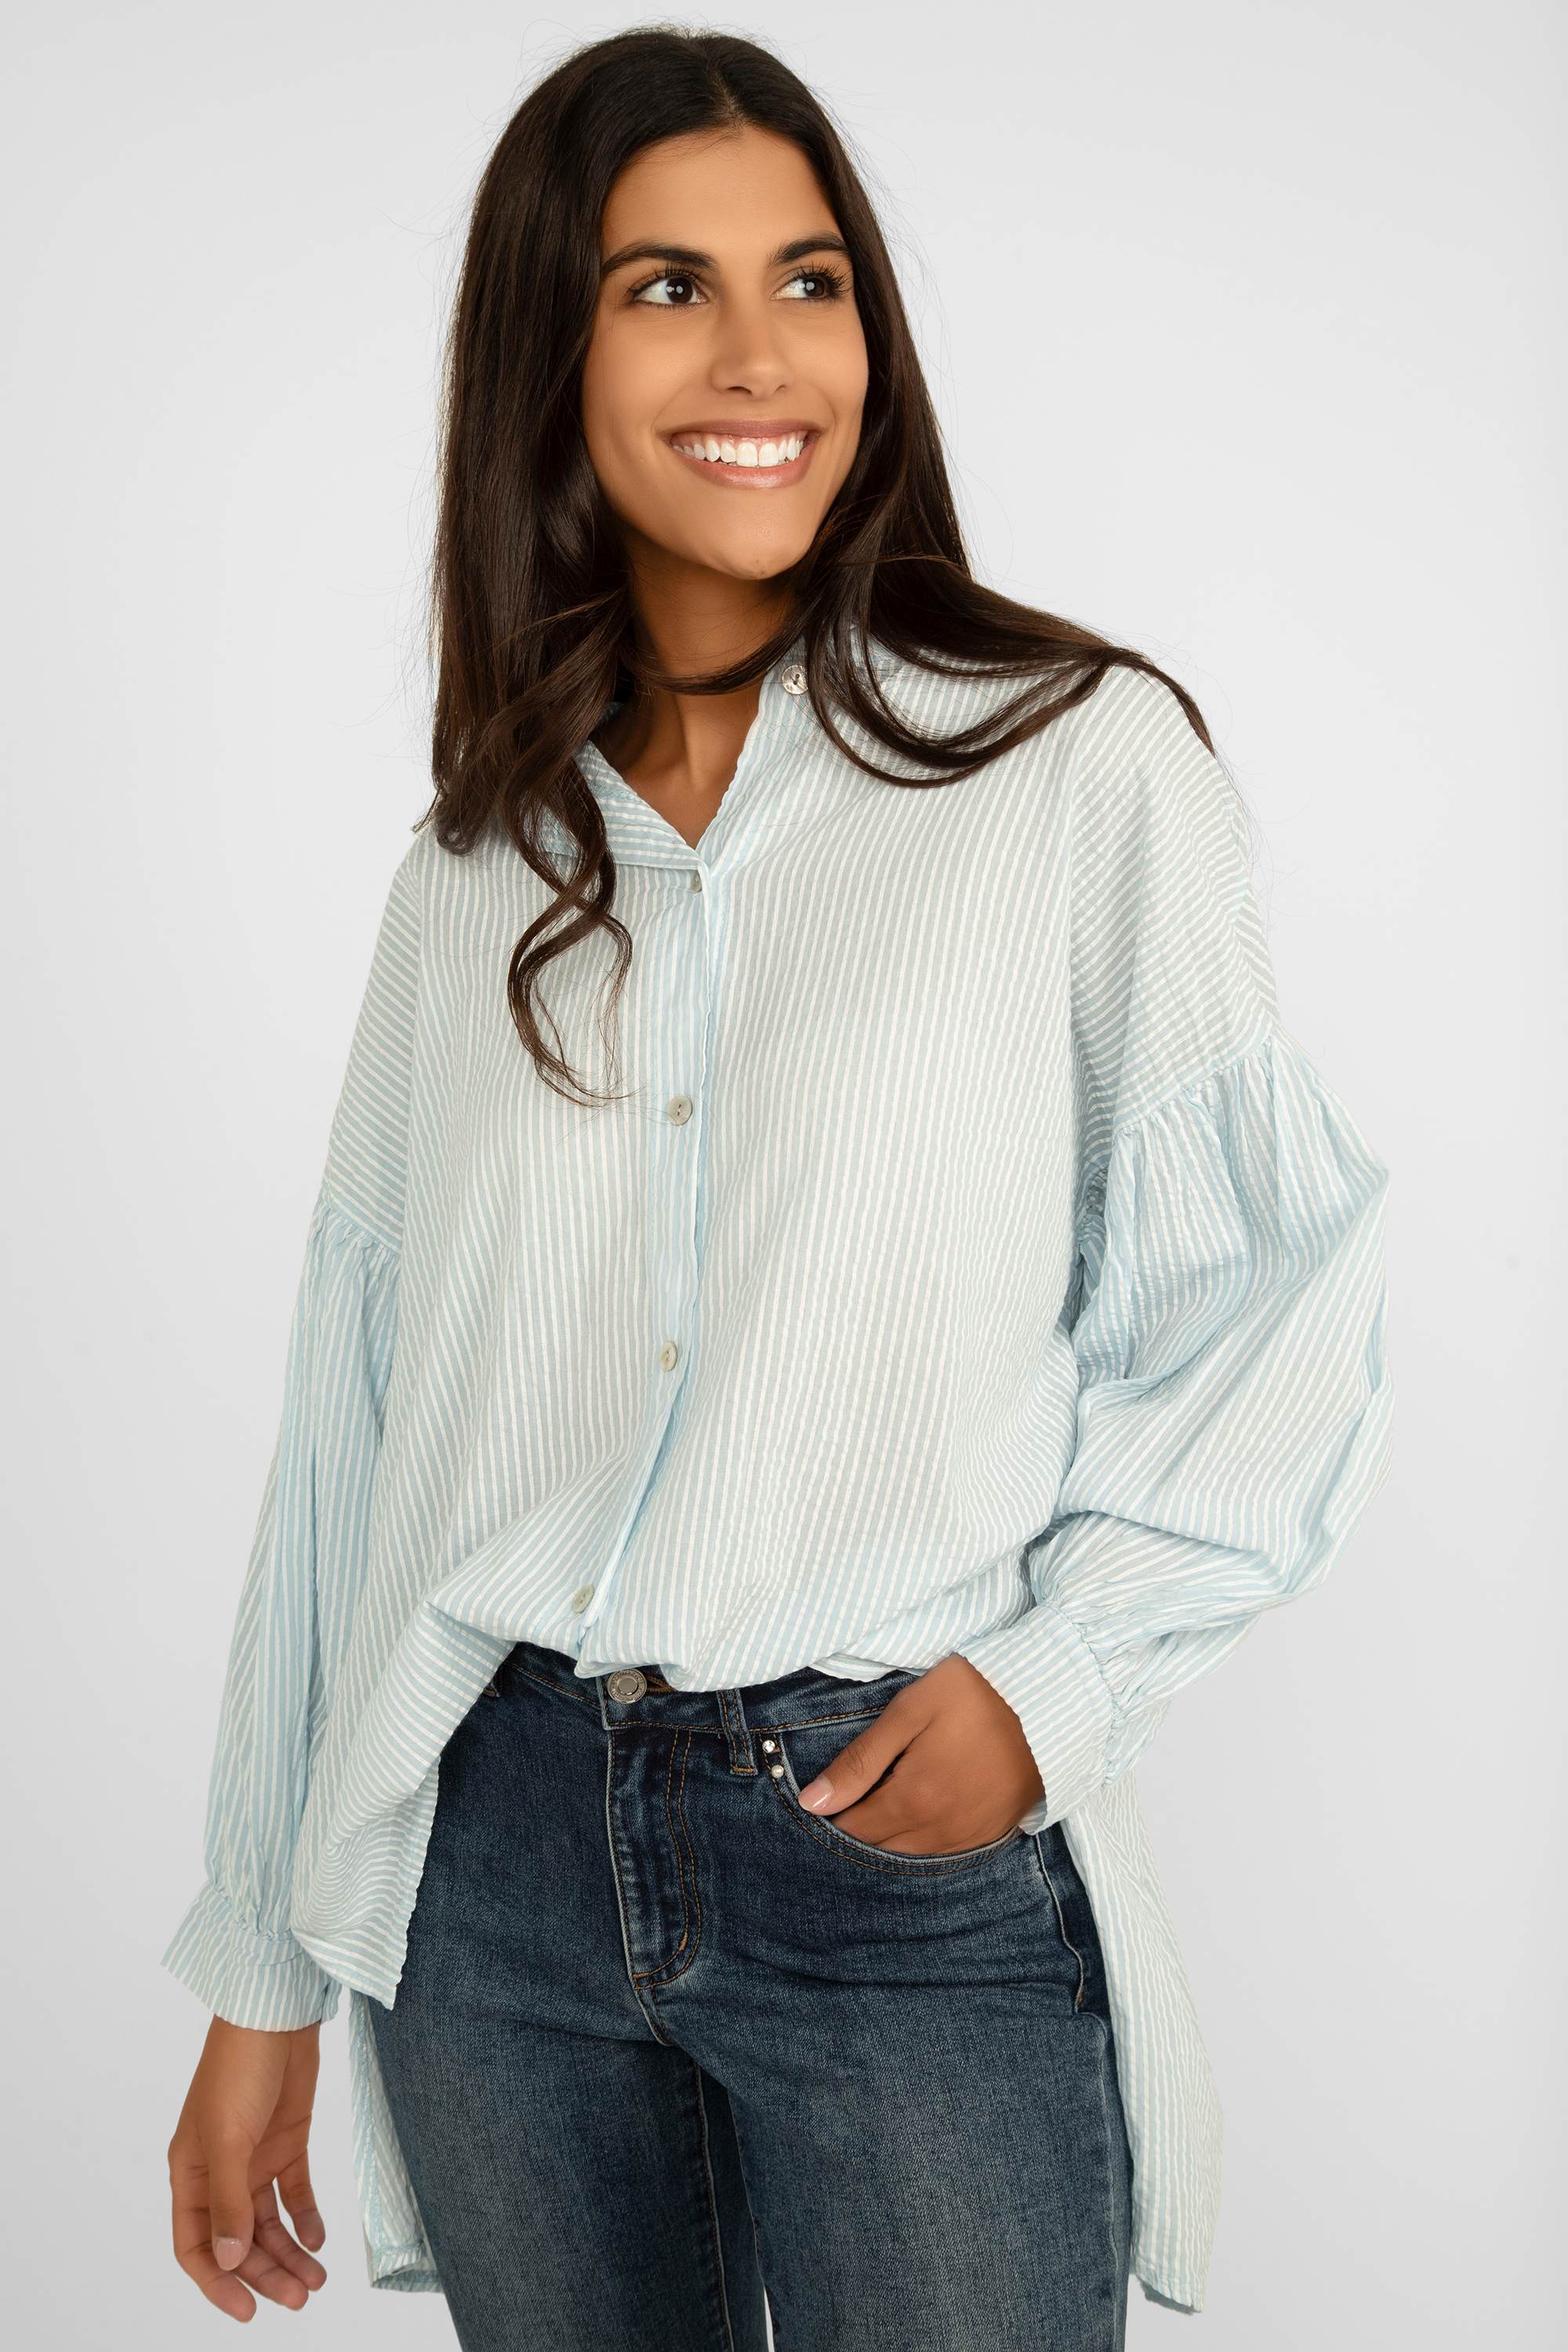 Elissia (JY3160) Women's Long Puff Sleeve Striped Button Up Collared Shirt in baby blue & white stripes